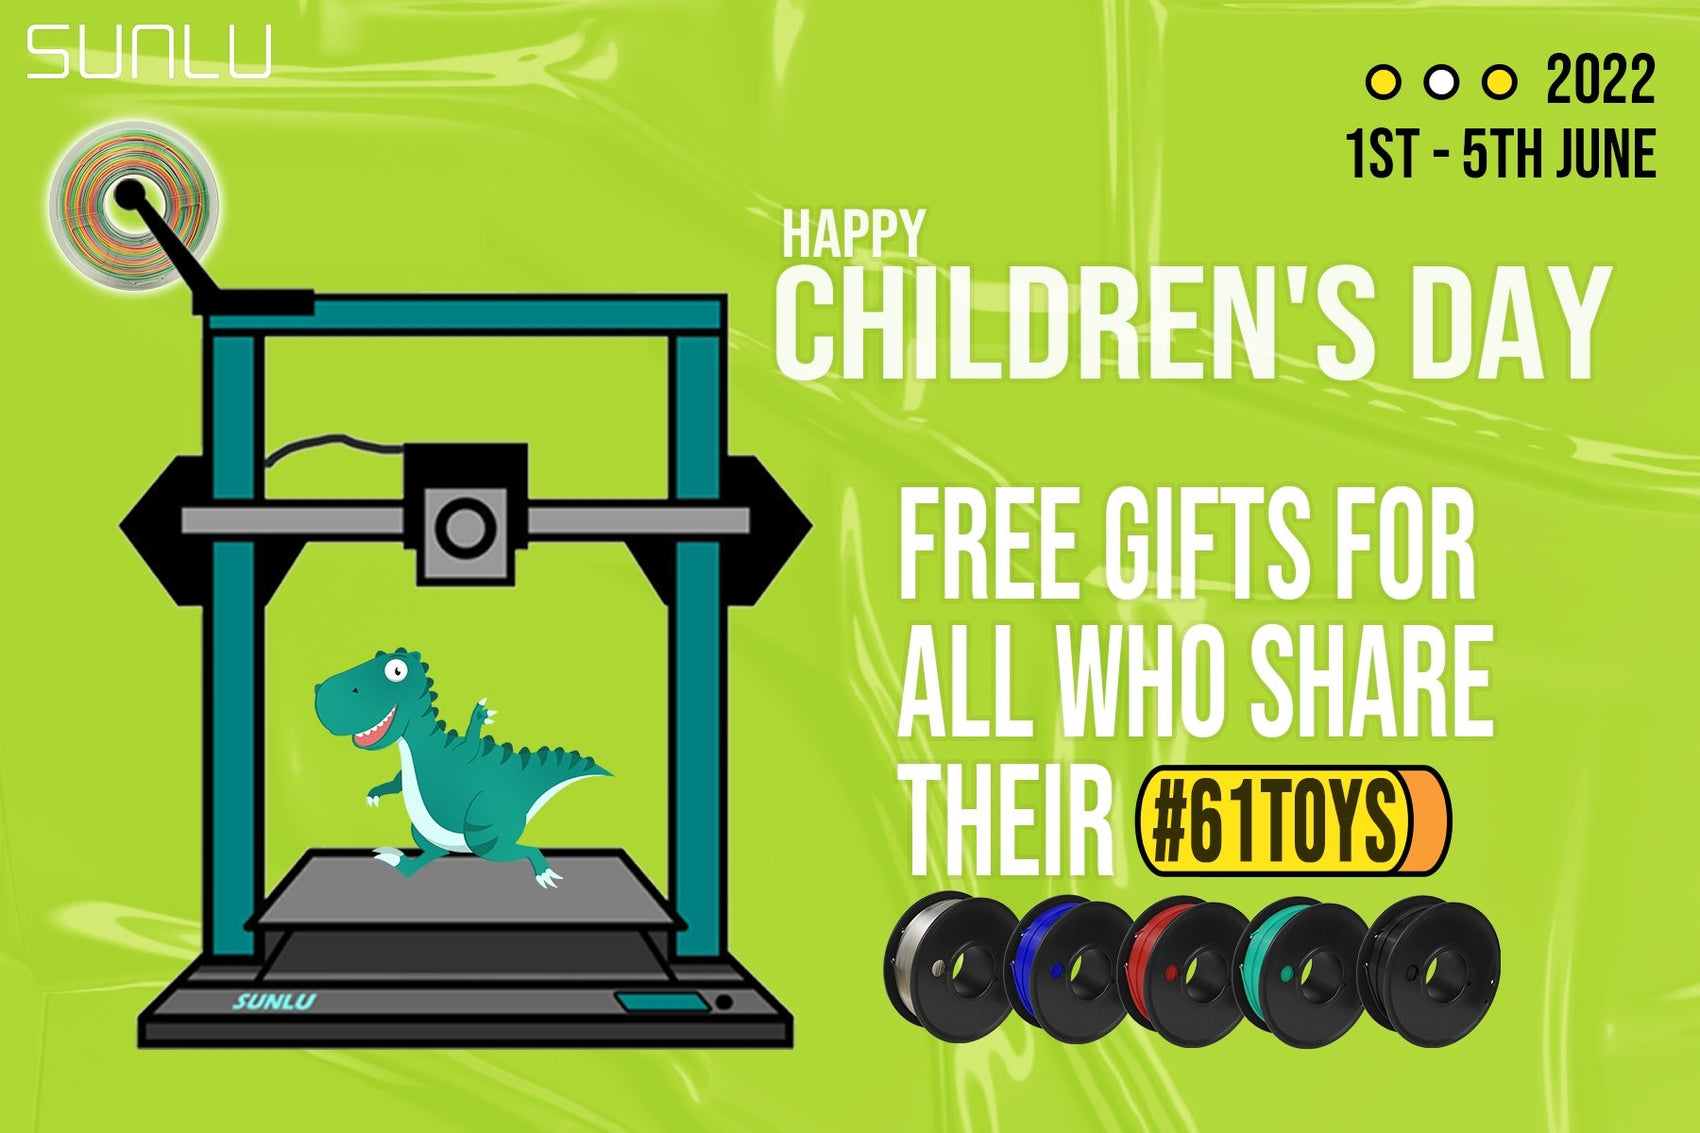 Free gifts for you, just come and share! Happy Children's Day! - SUNLU Official Online Store｜Best 3D Filament Best Selling Supplier & Manufacturer